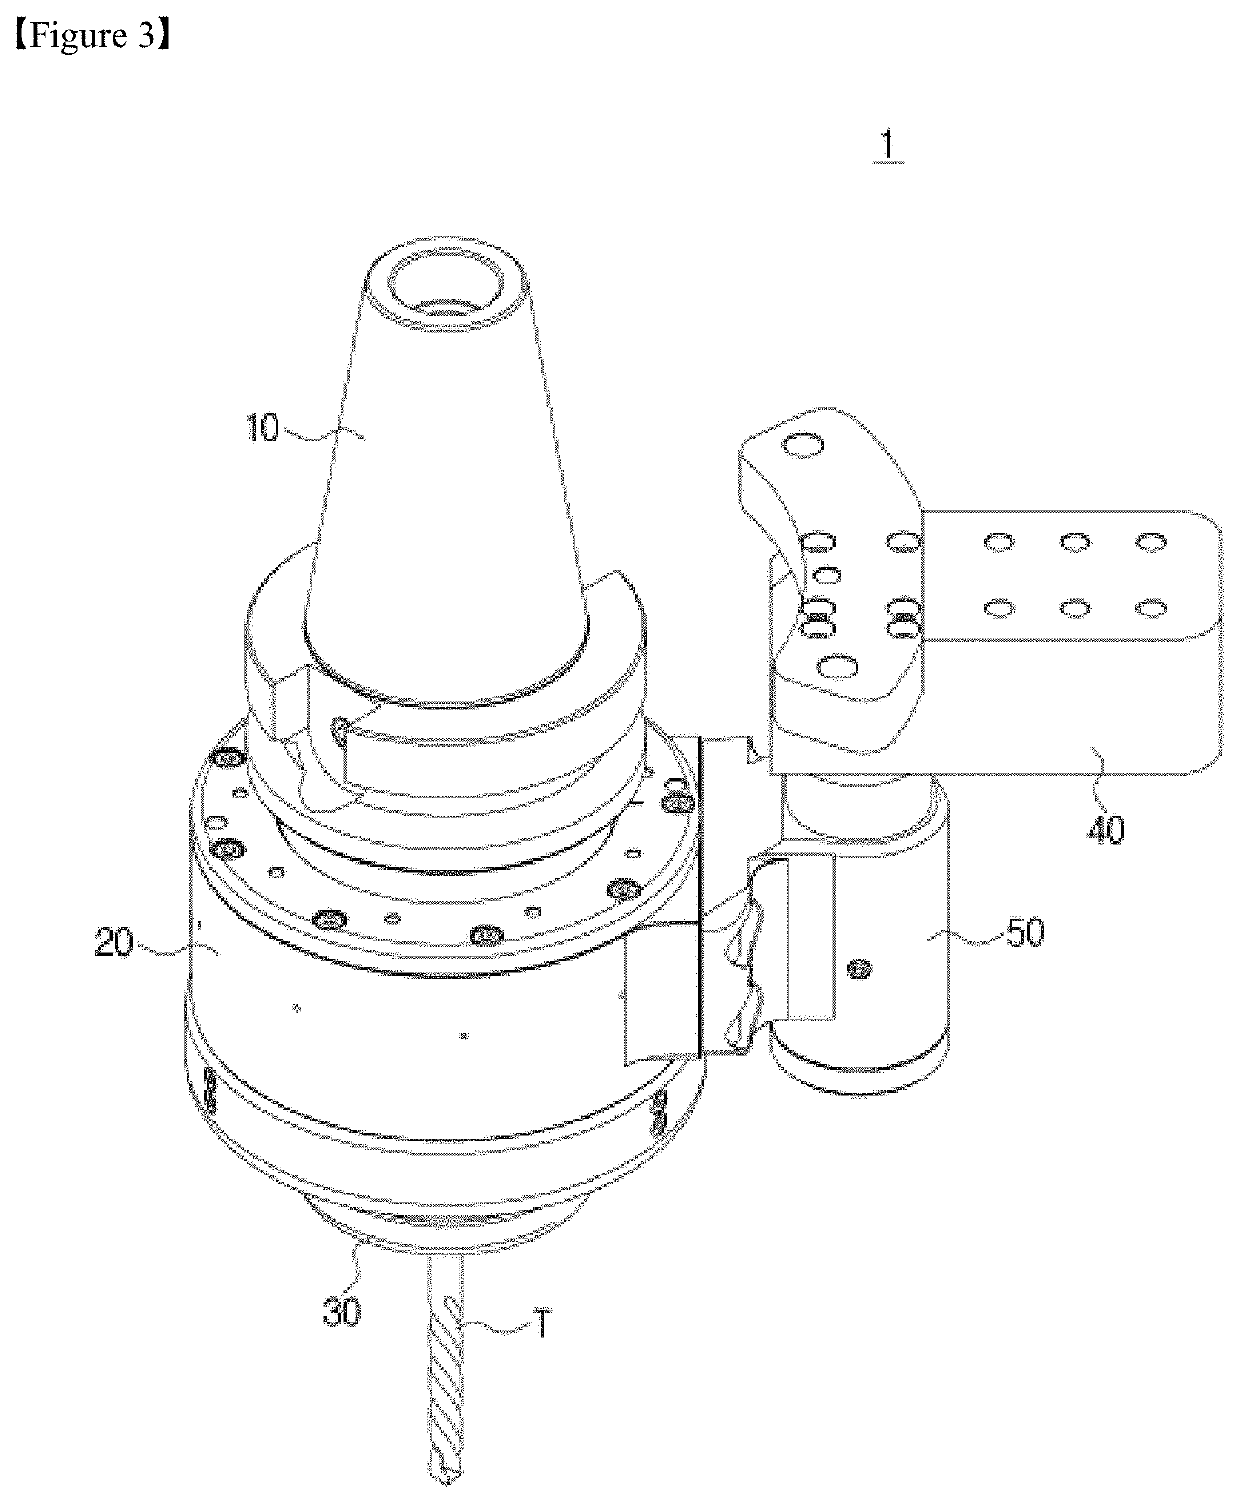 Tool holder with straight spray of cooling water for machine tool